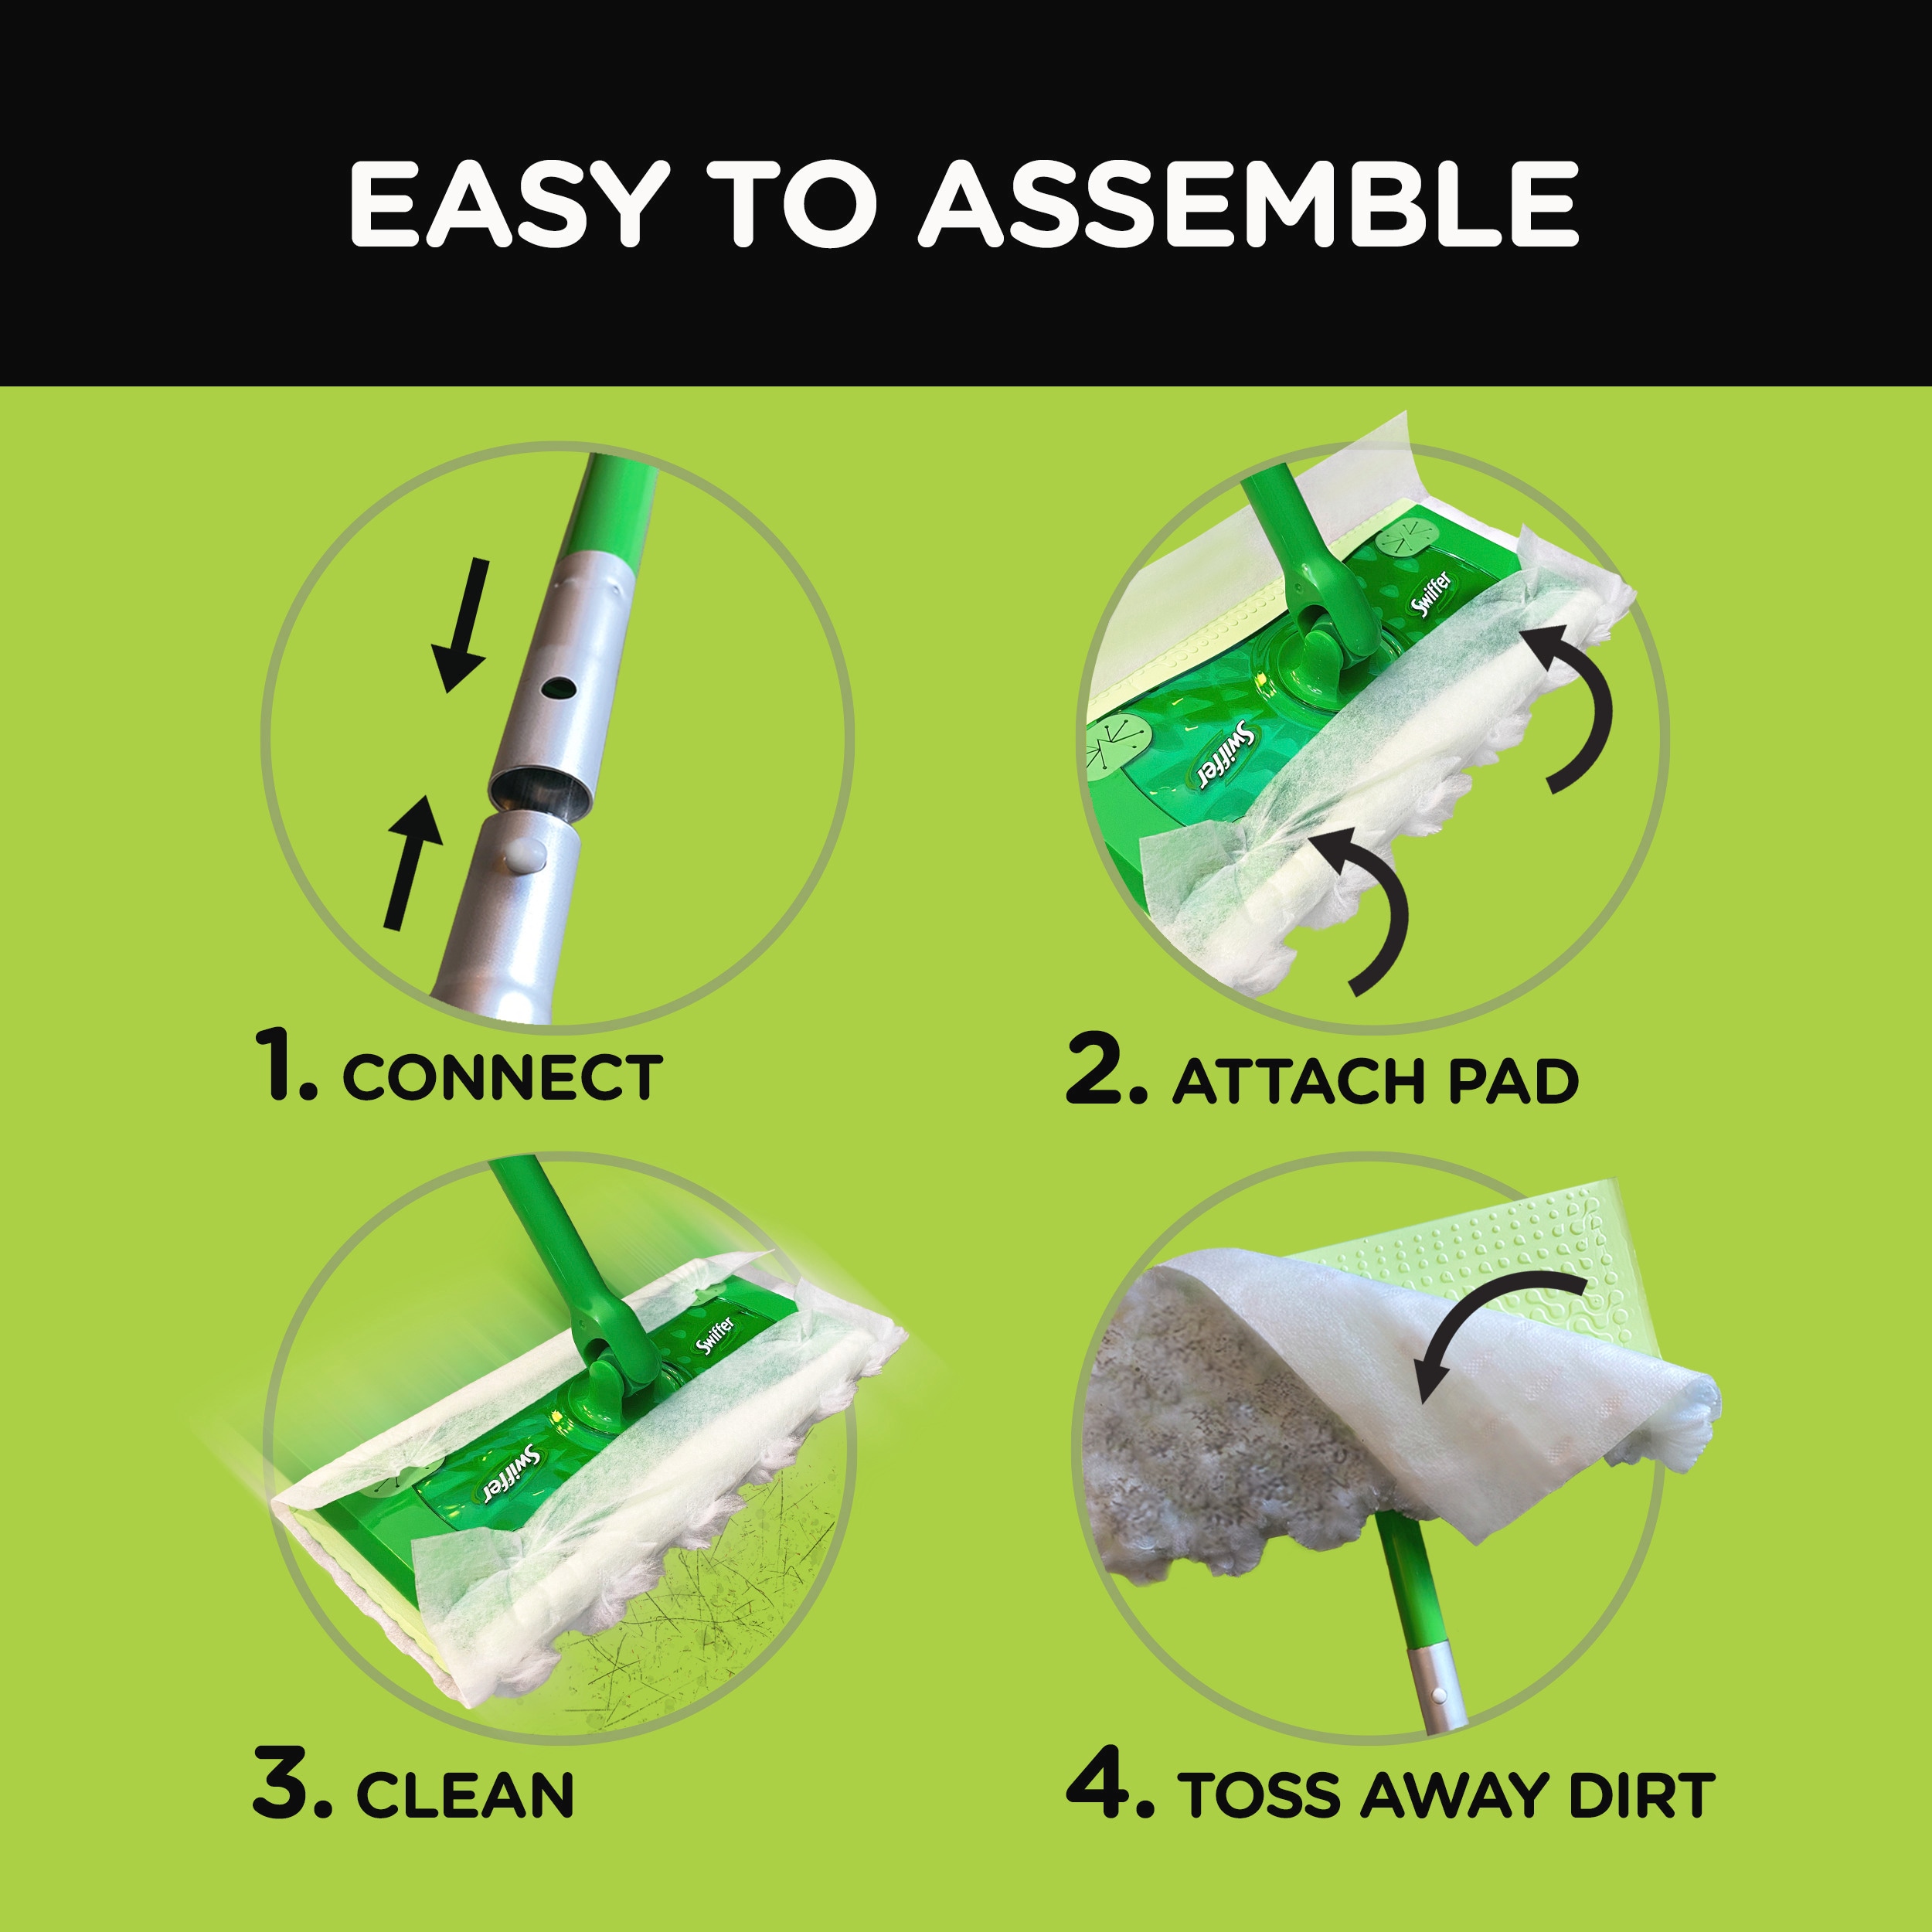 Swiffer Sweeper Dry and Wet Starter Kit Dust Mop in the Dust Mops  department at